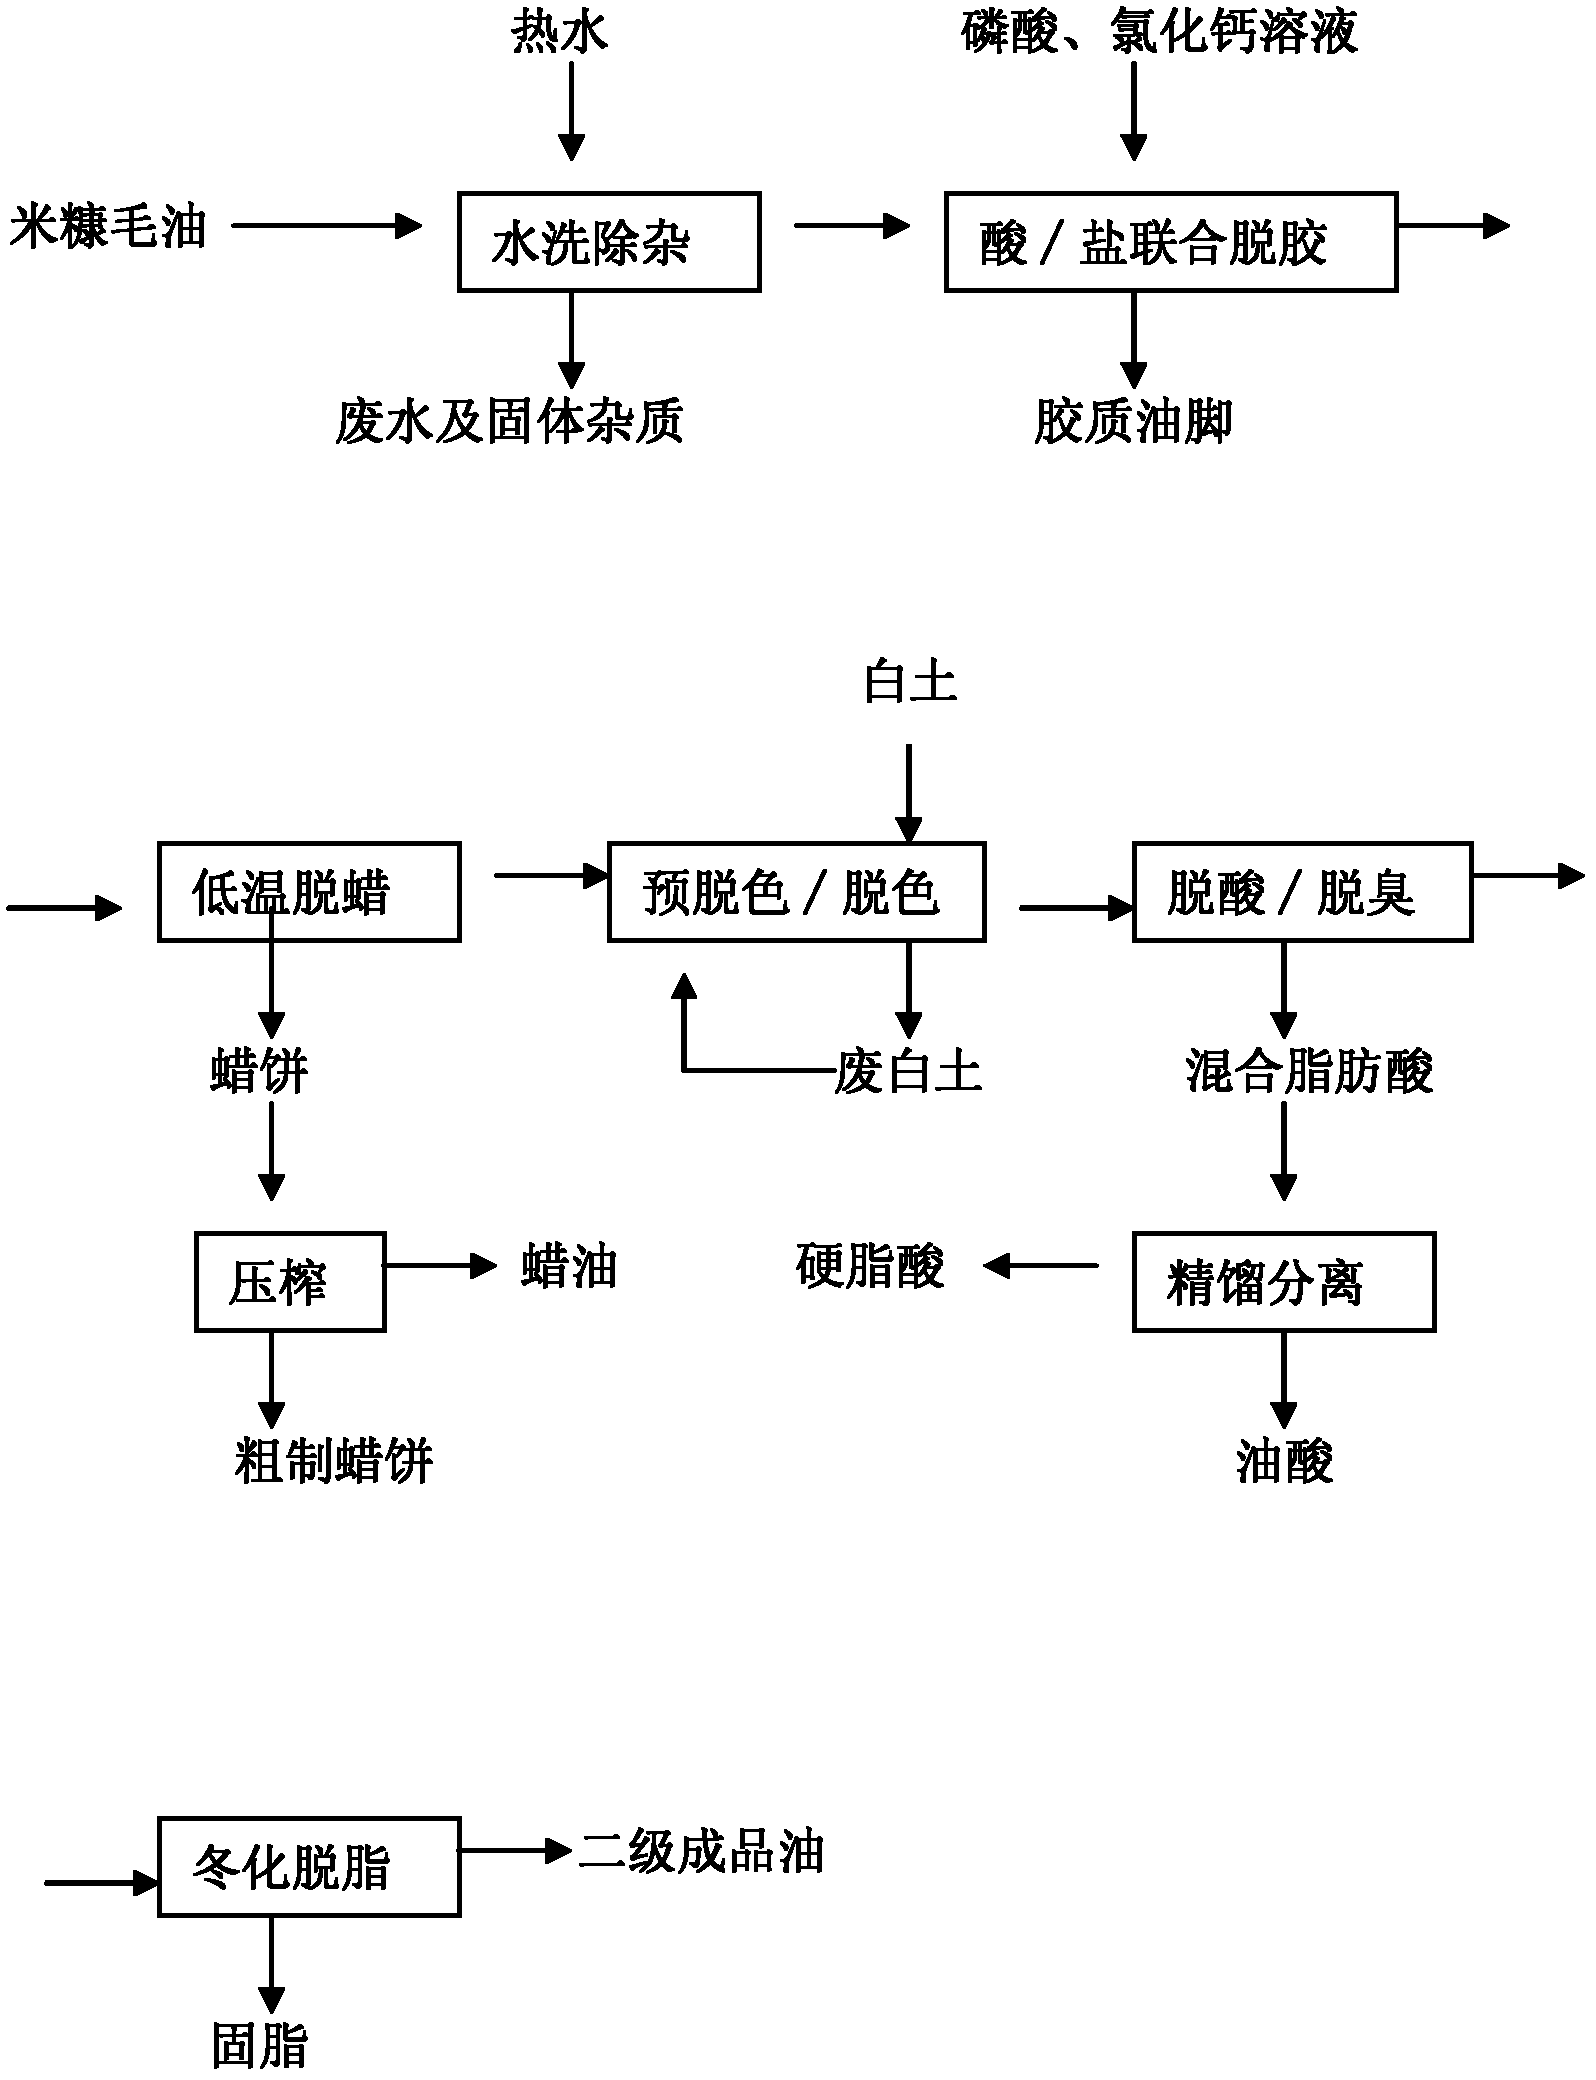 Rice bran oil refinement and byproduct production method